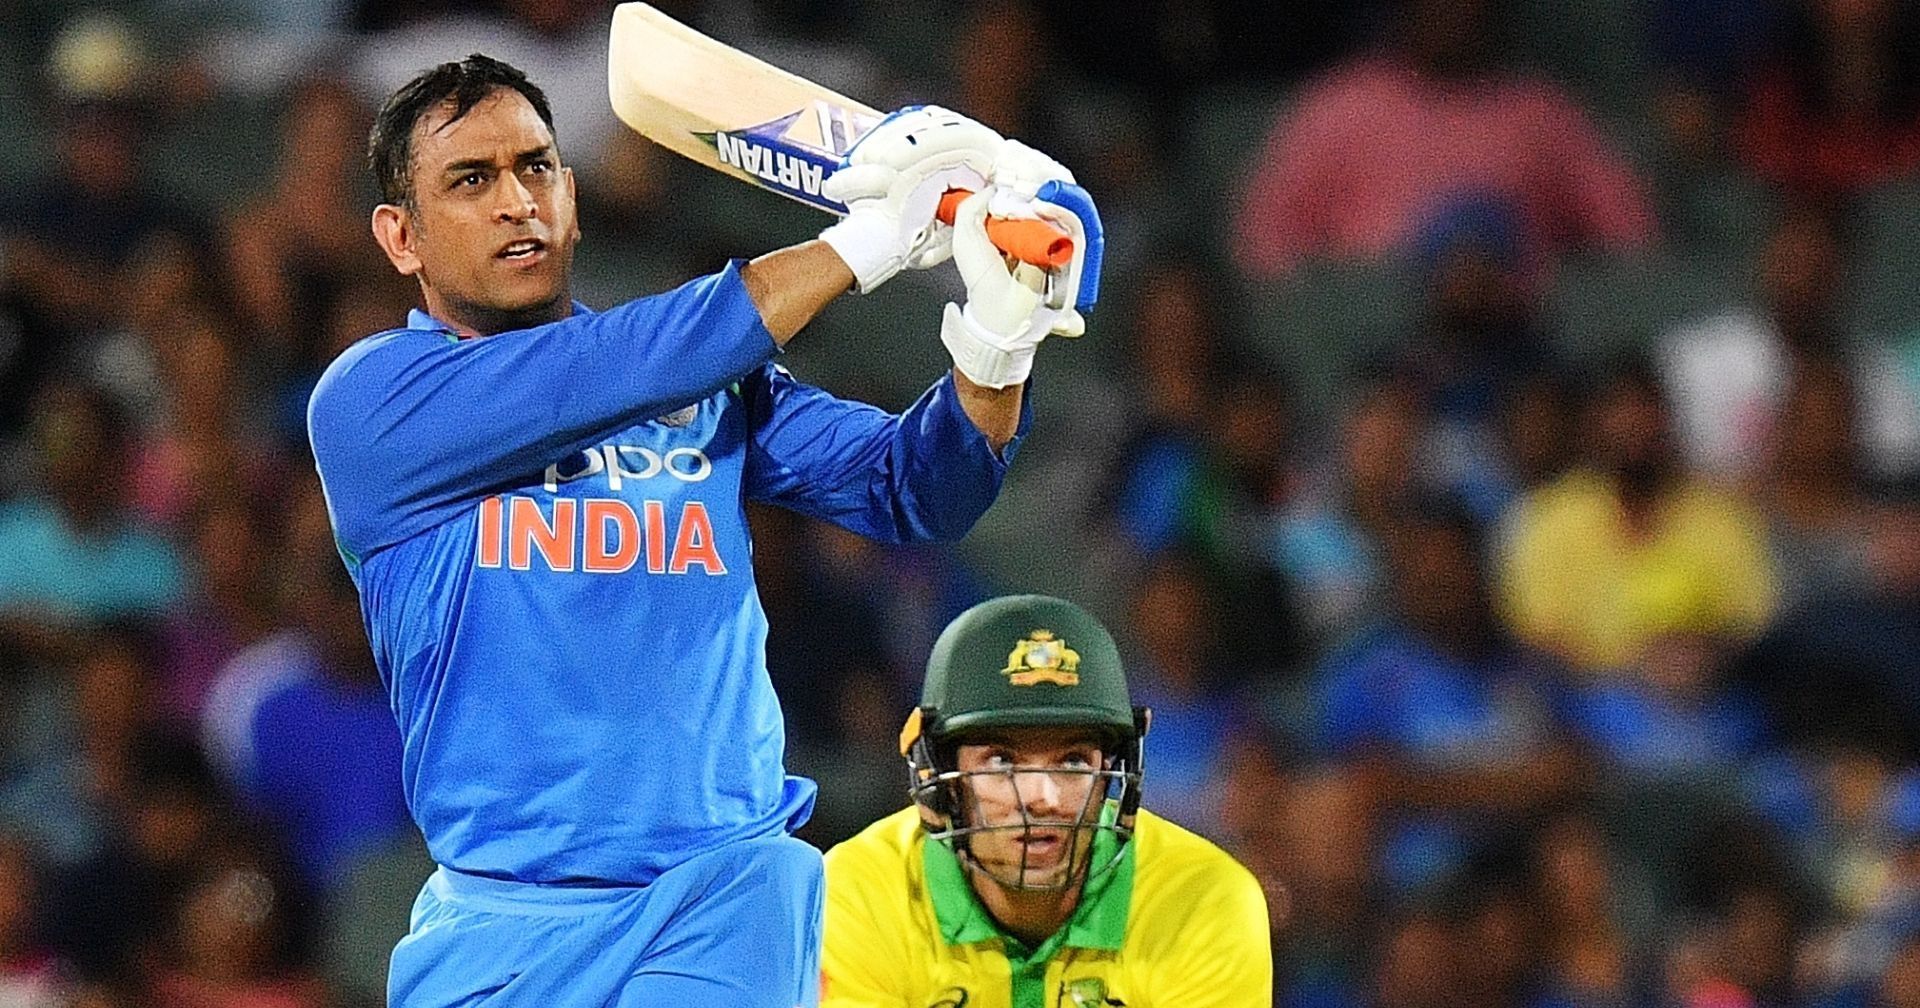 Will MS Dhoni Be Playing The World Cup? It Certainly Looks That Way